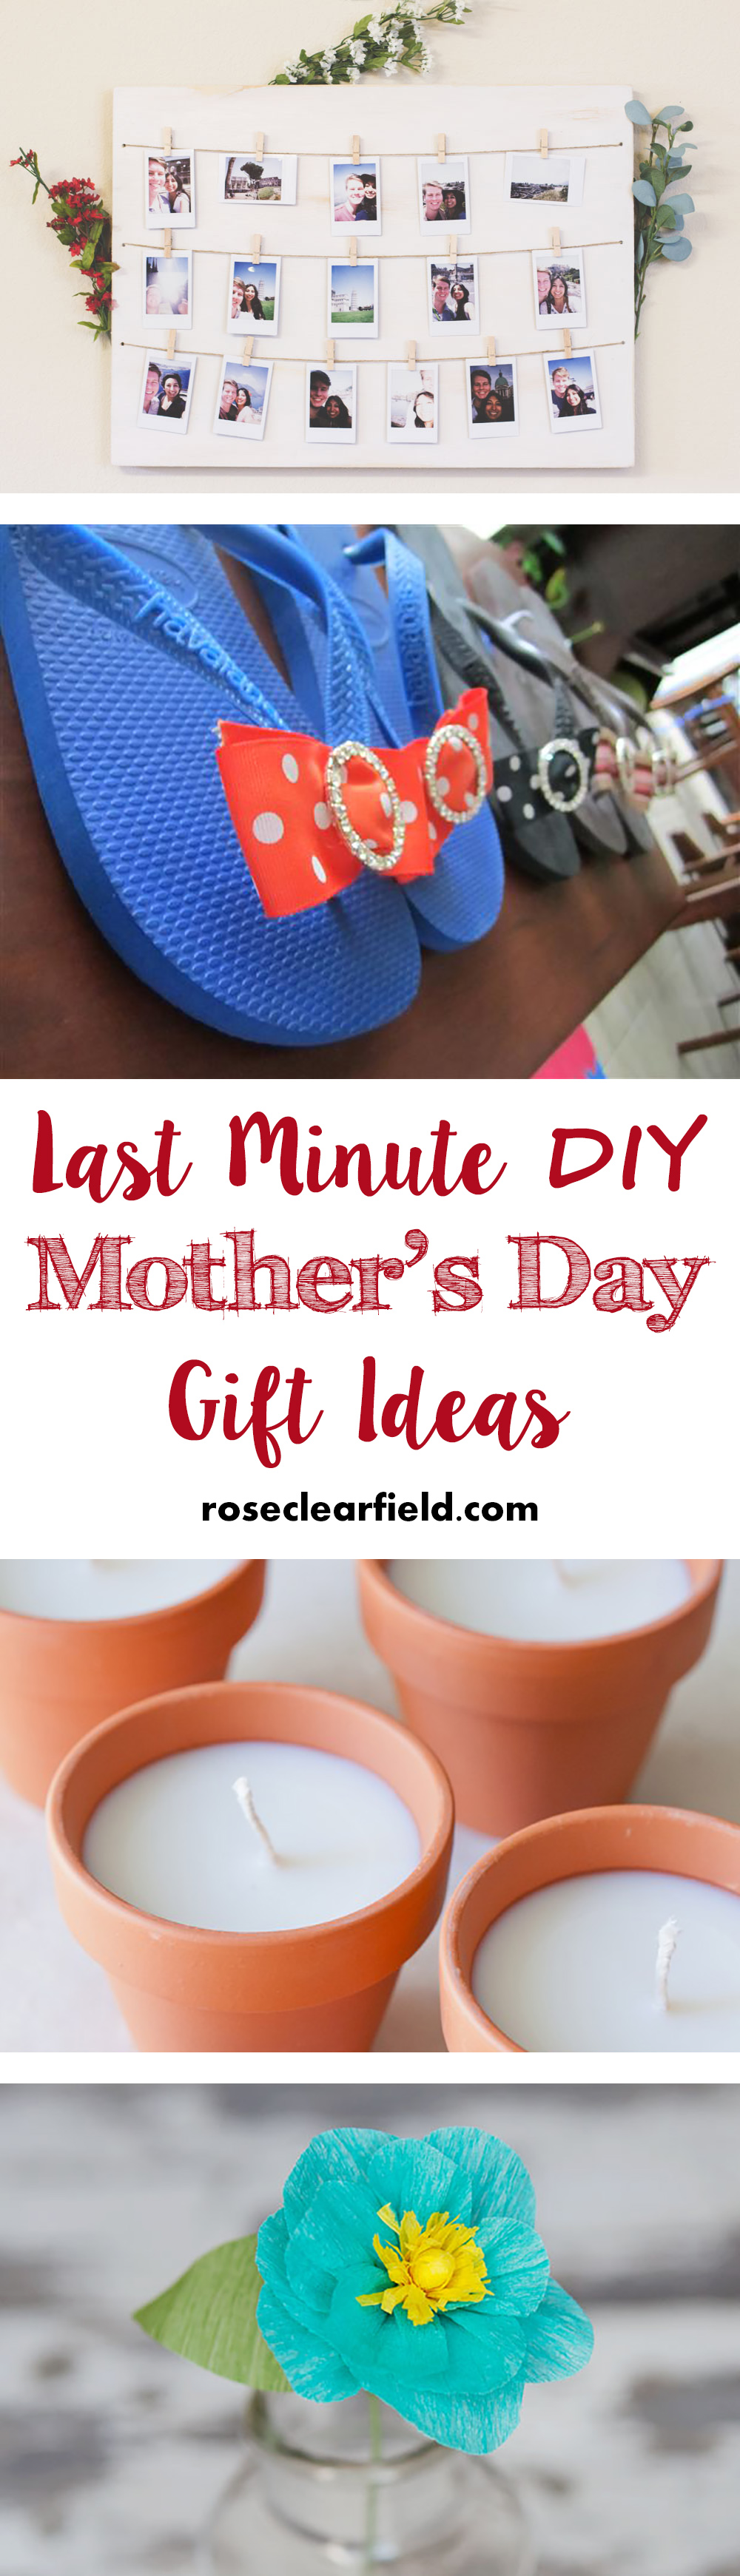 Last Minute DIY Mother's Day Gift Ideas | https://www.roseclearfield.com